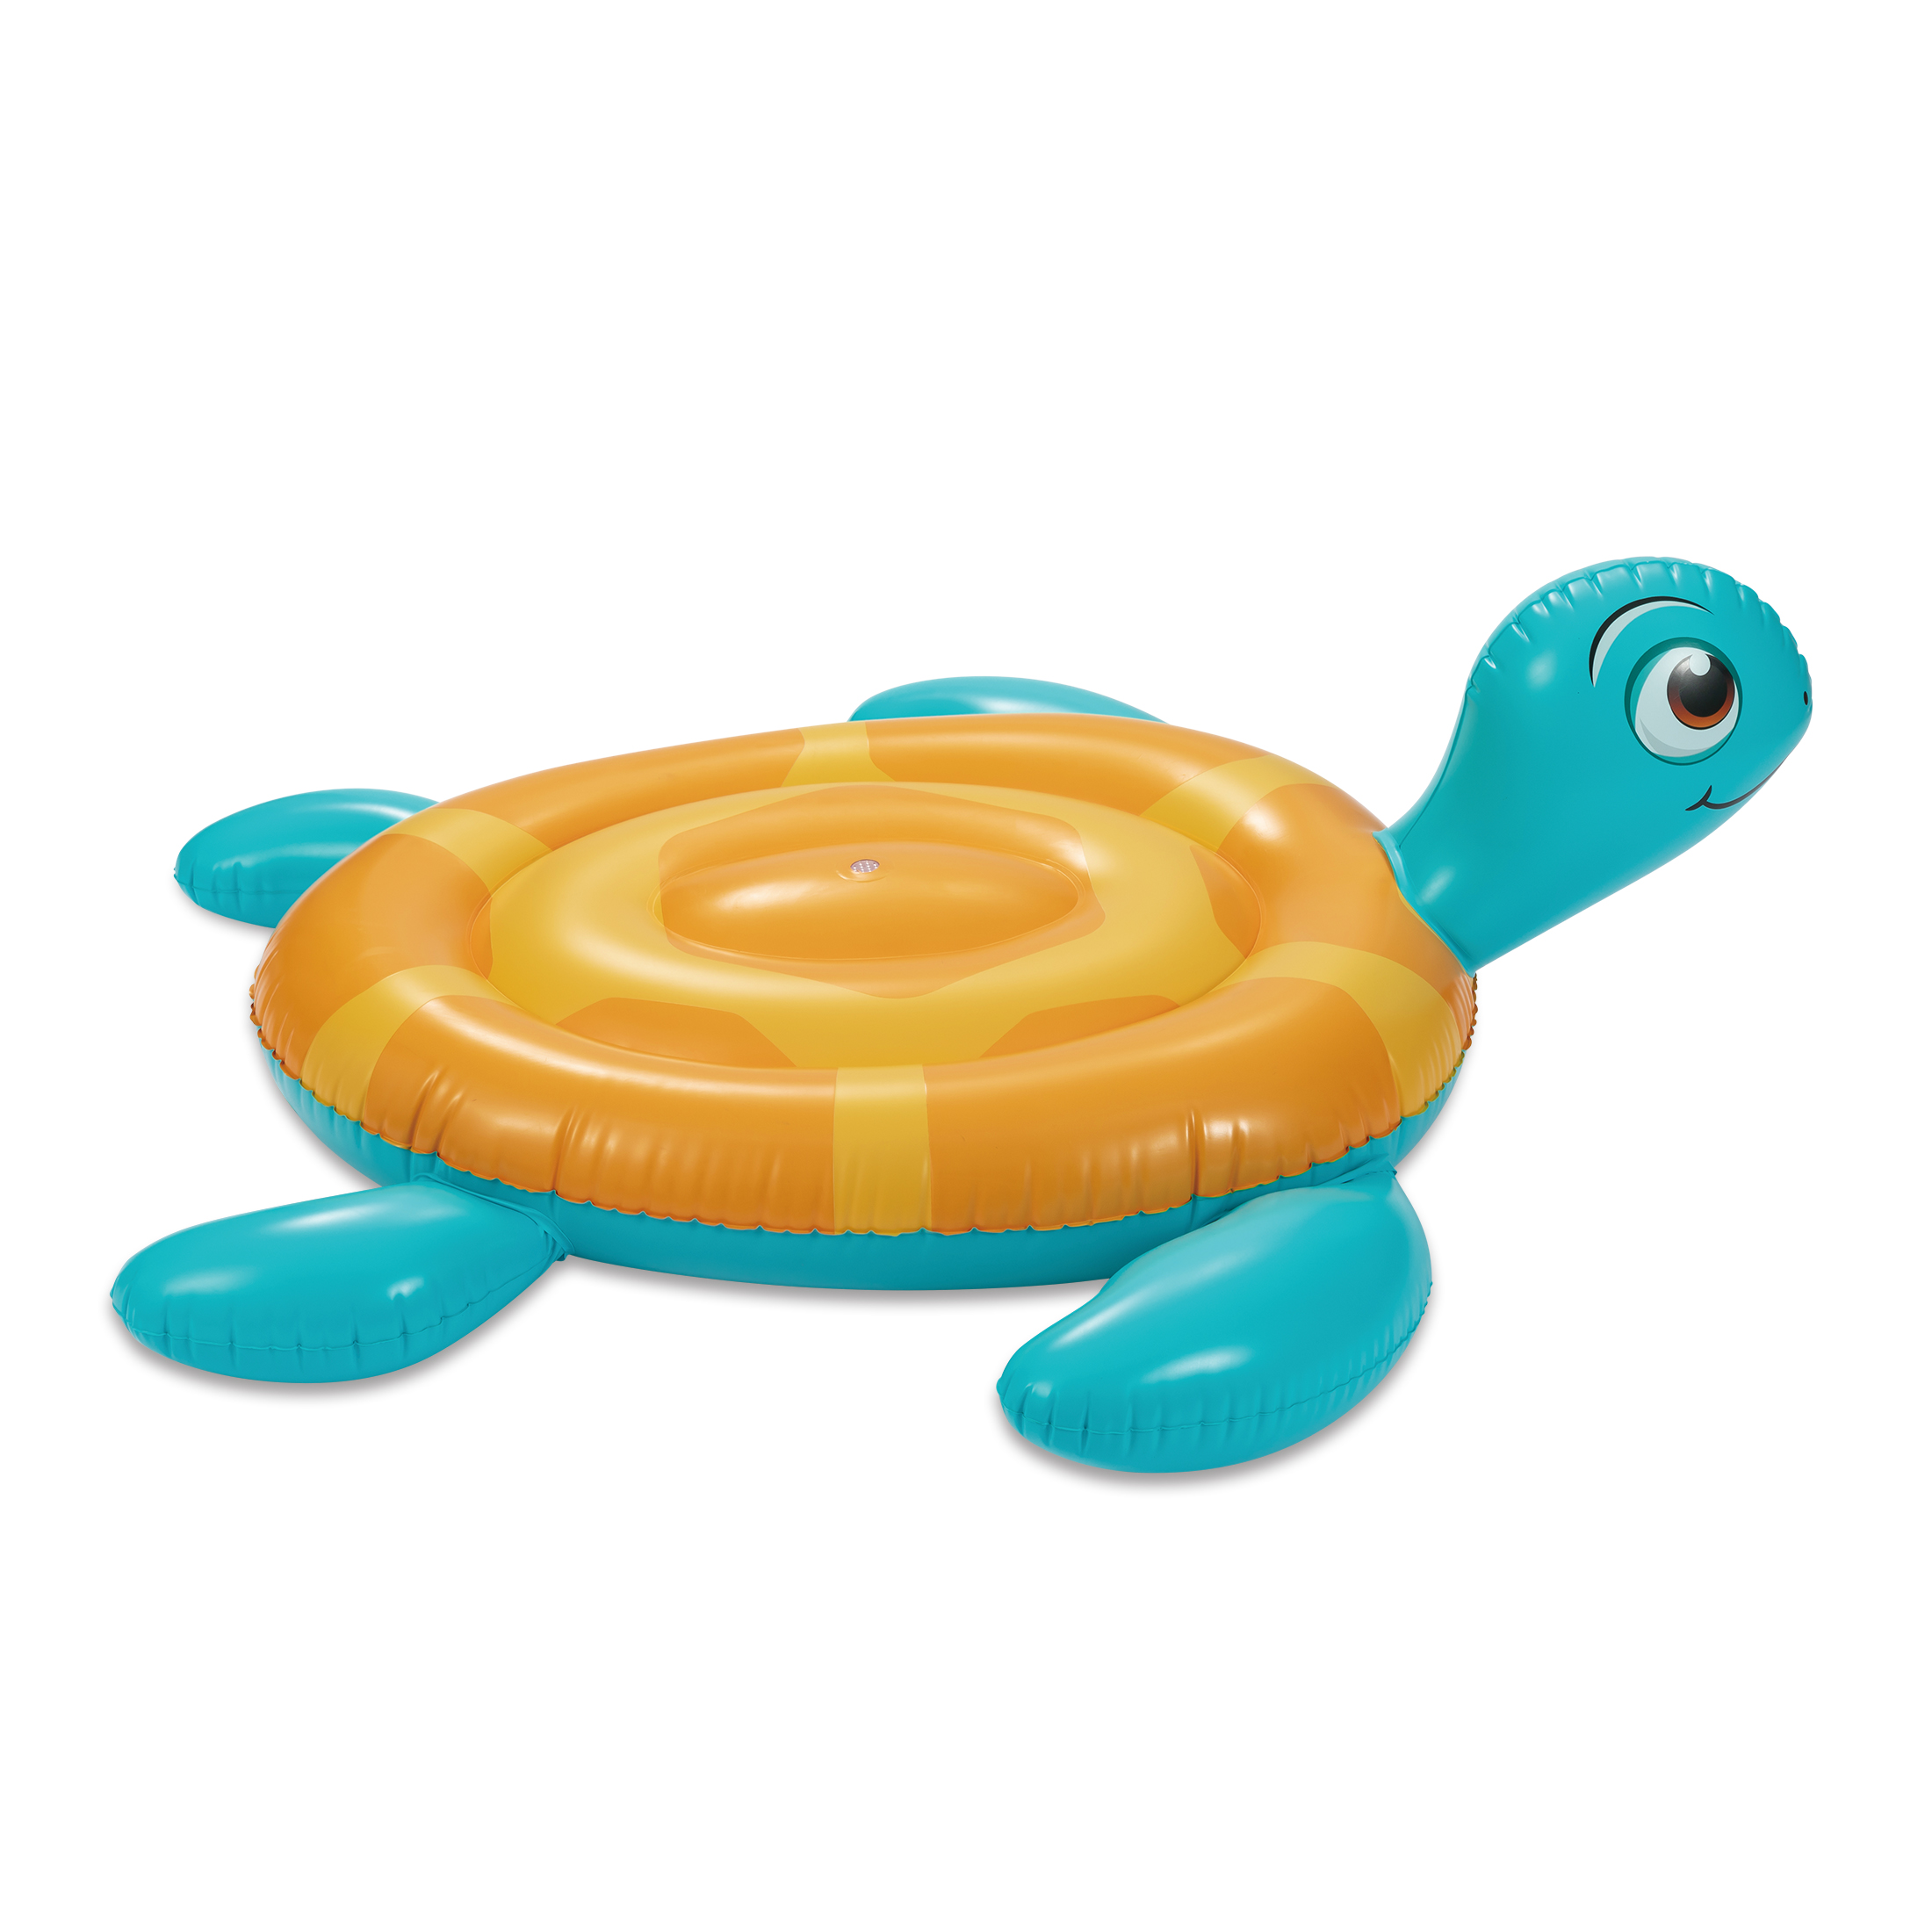 Play Day Inflatable Sea Turtle Water Sprinkler Yard Game, for Kids, Age 3 & up, Unisex - image 1 of 5